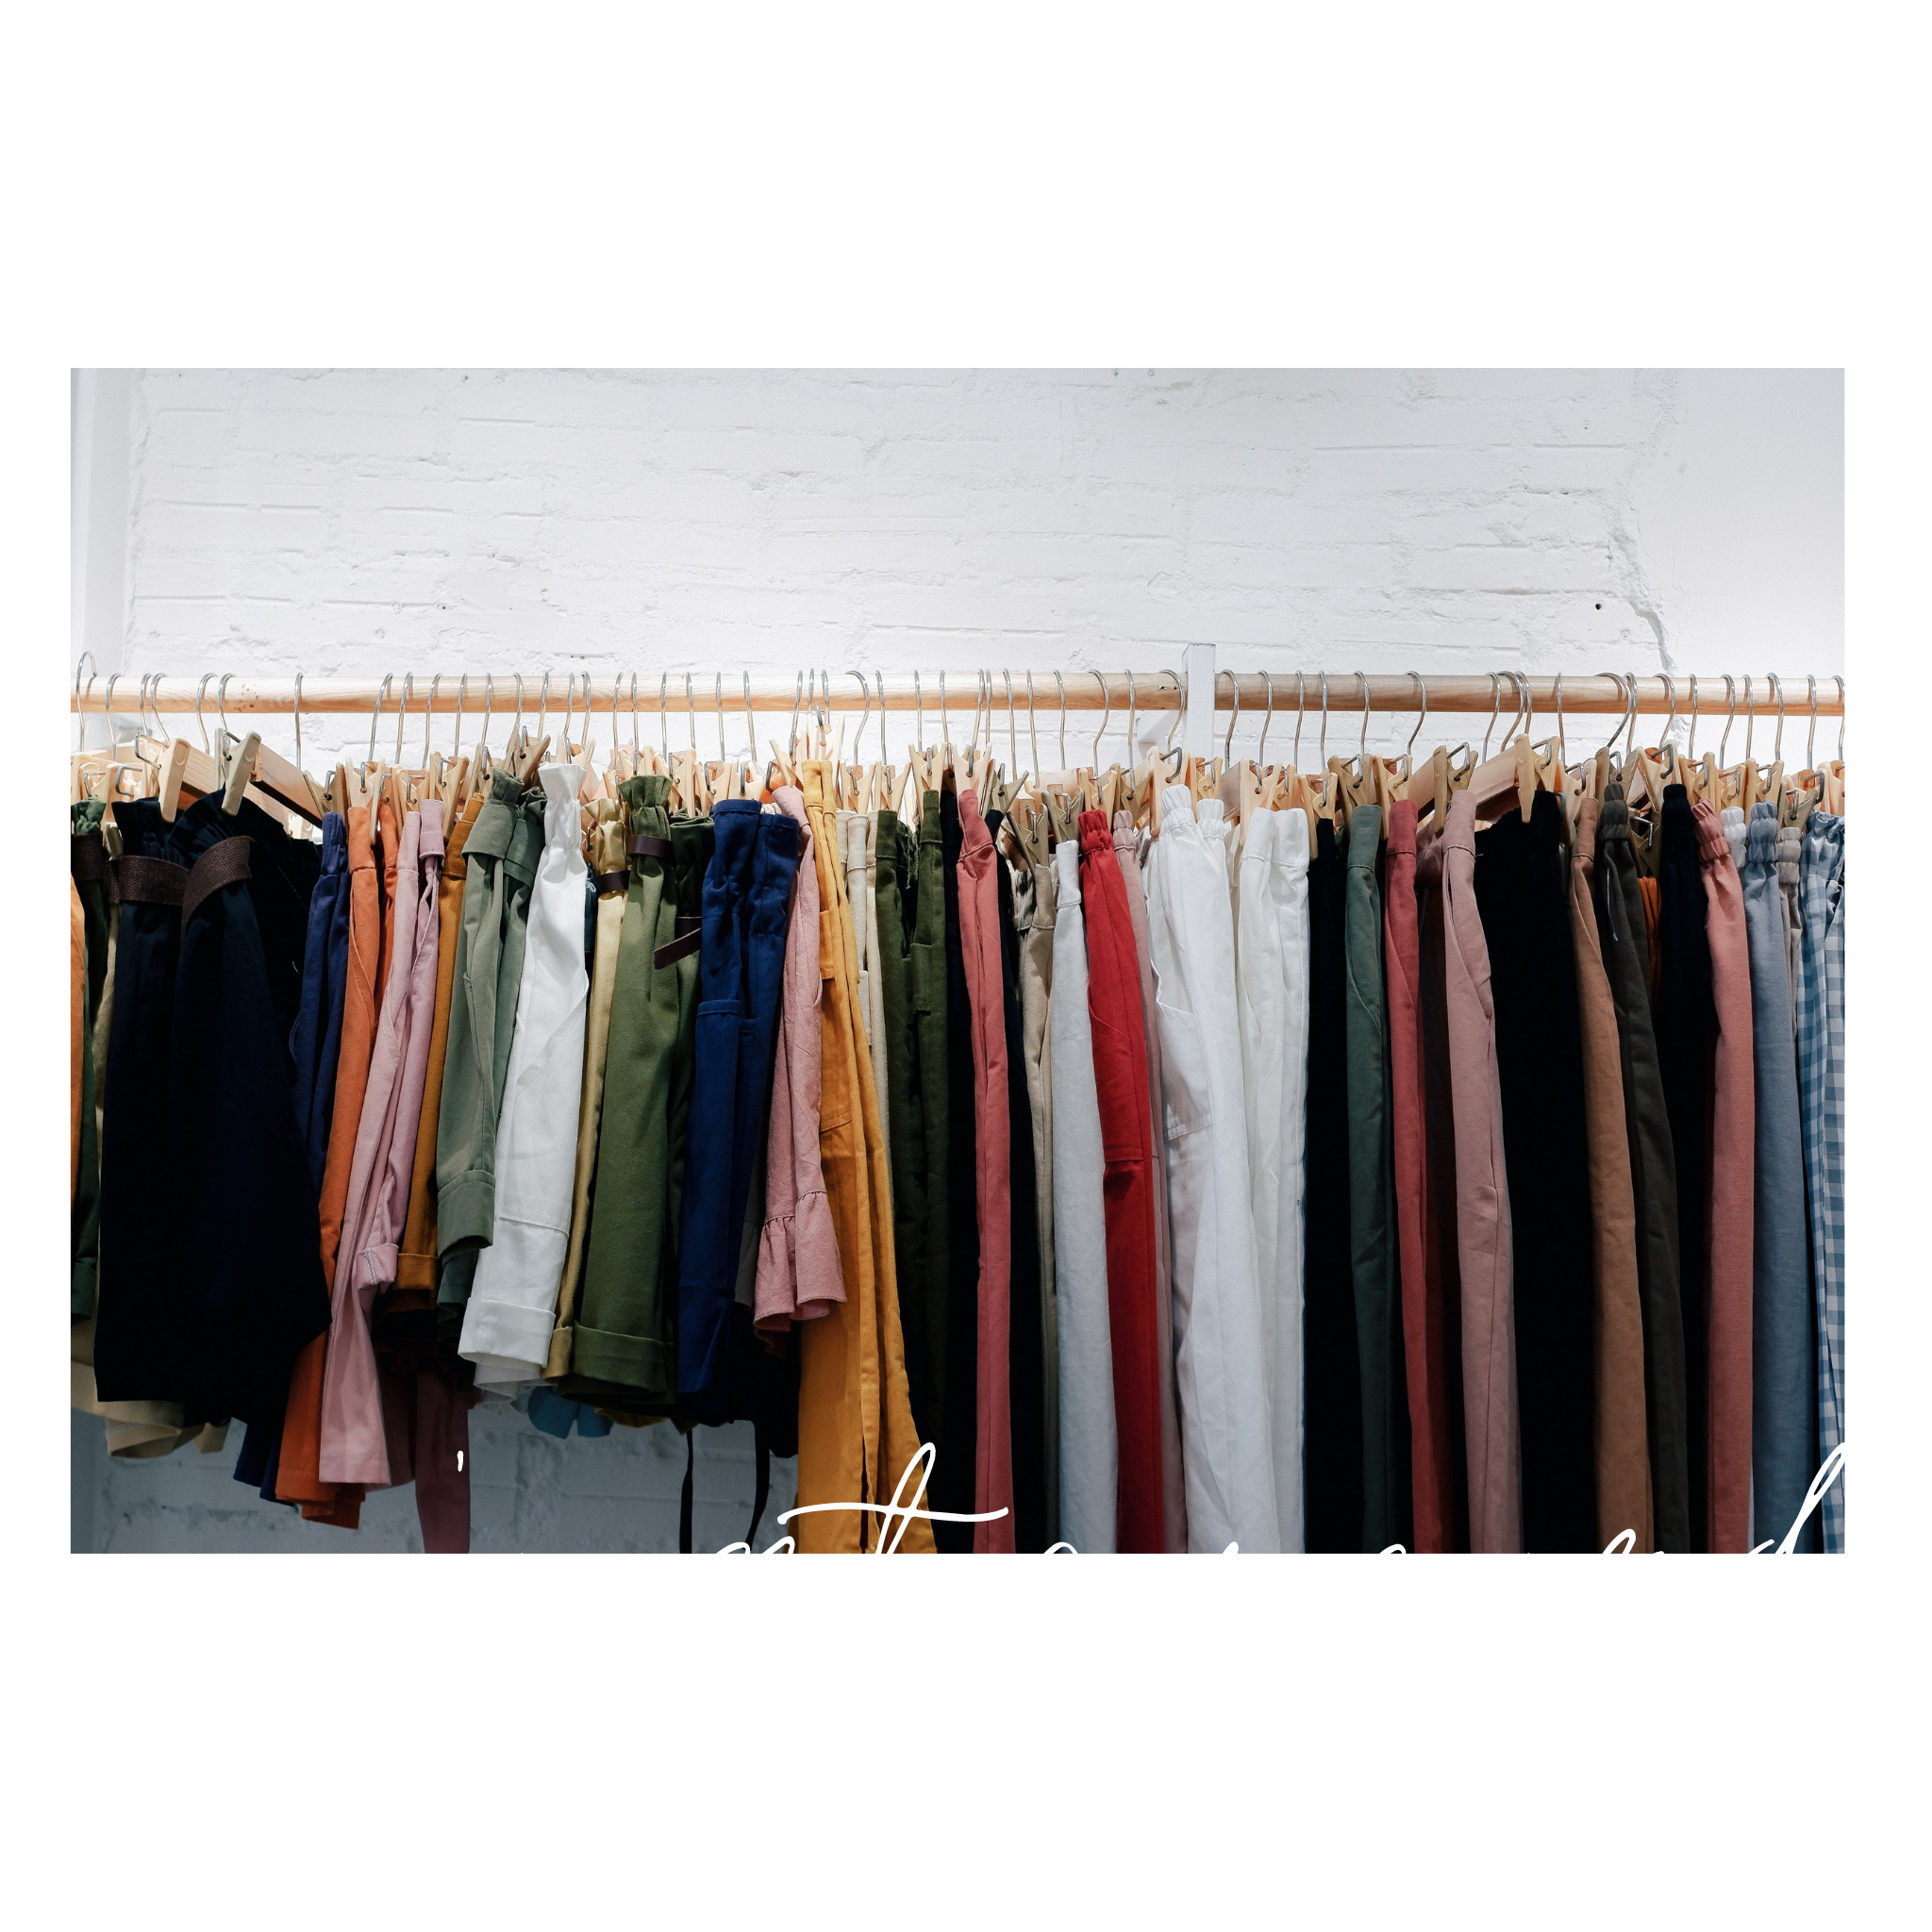 Where to Donate Clothes?